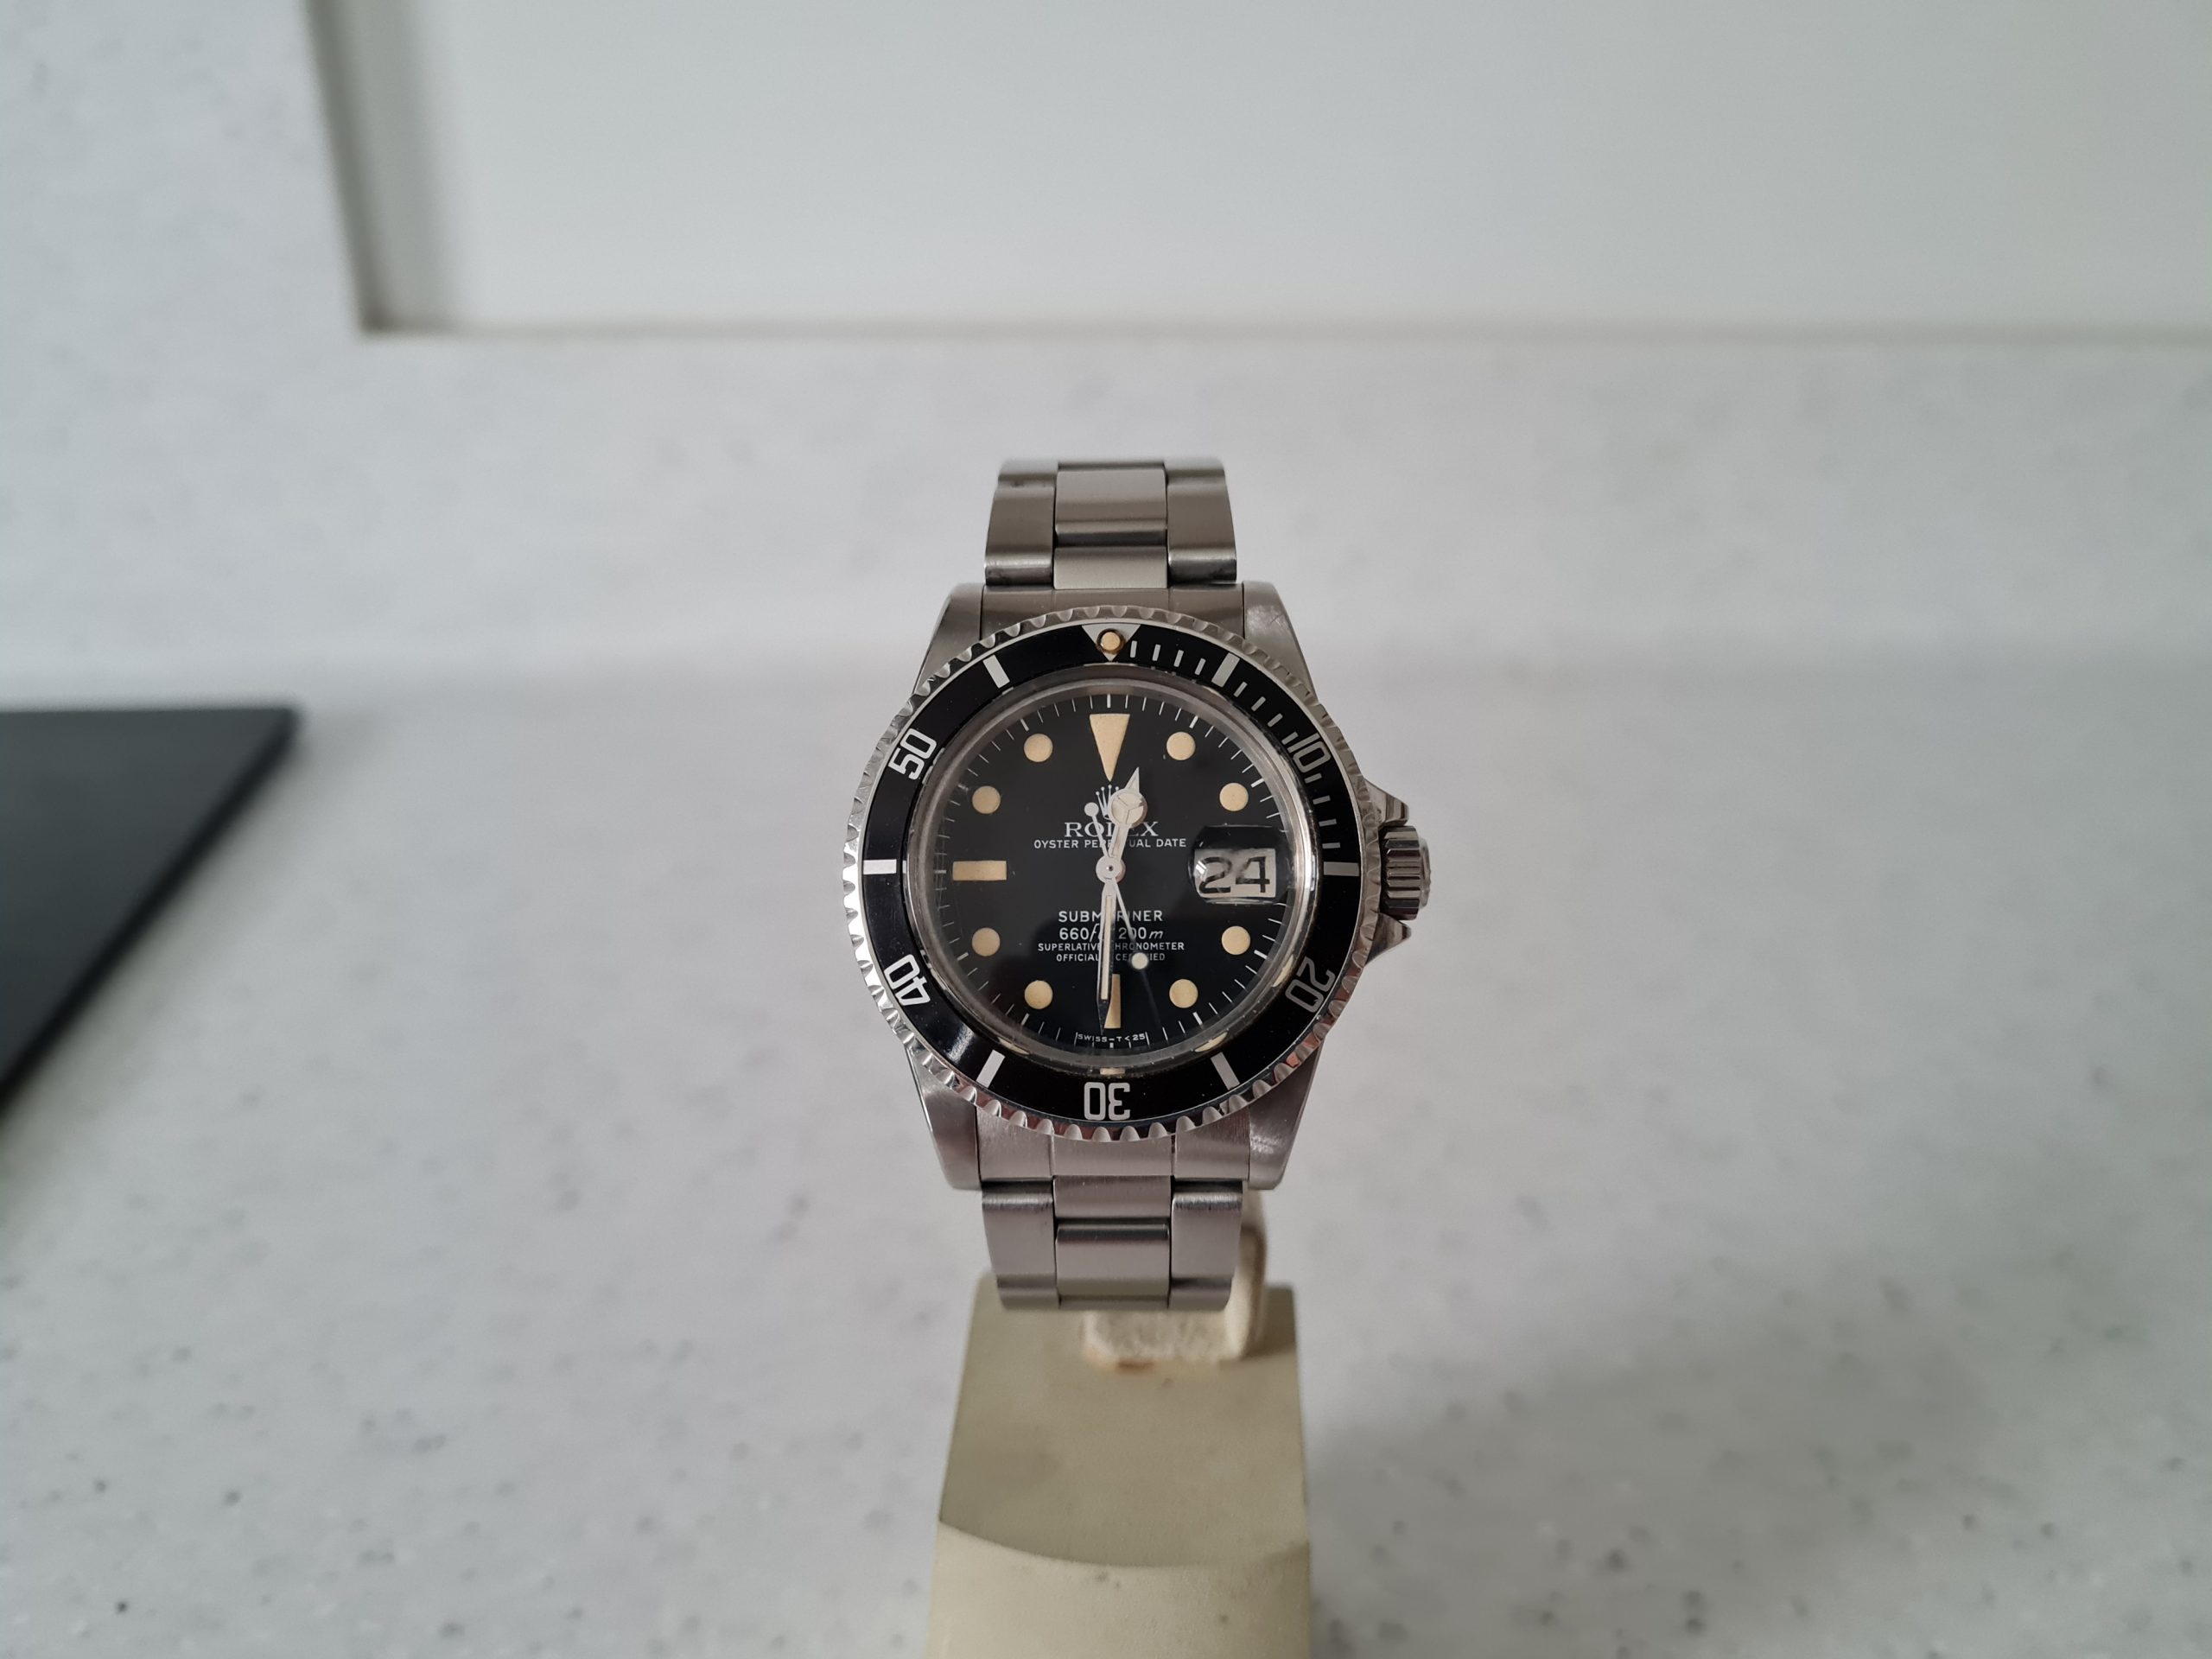 Sell my Classic Submariner